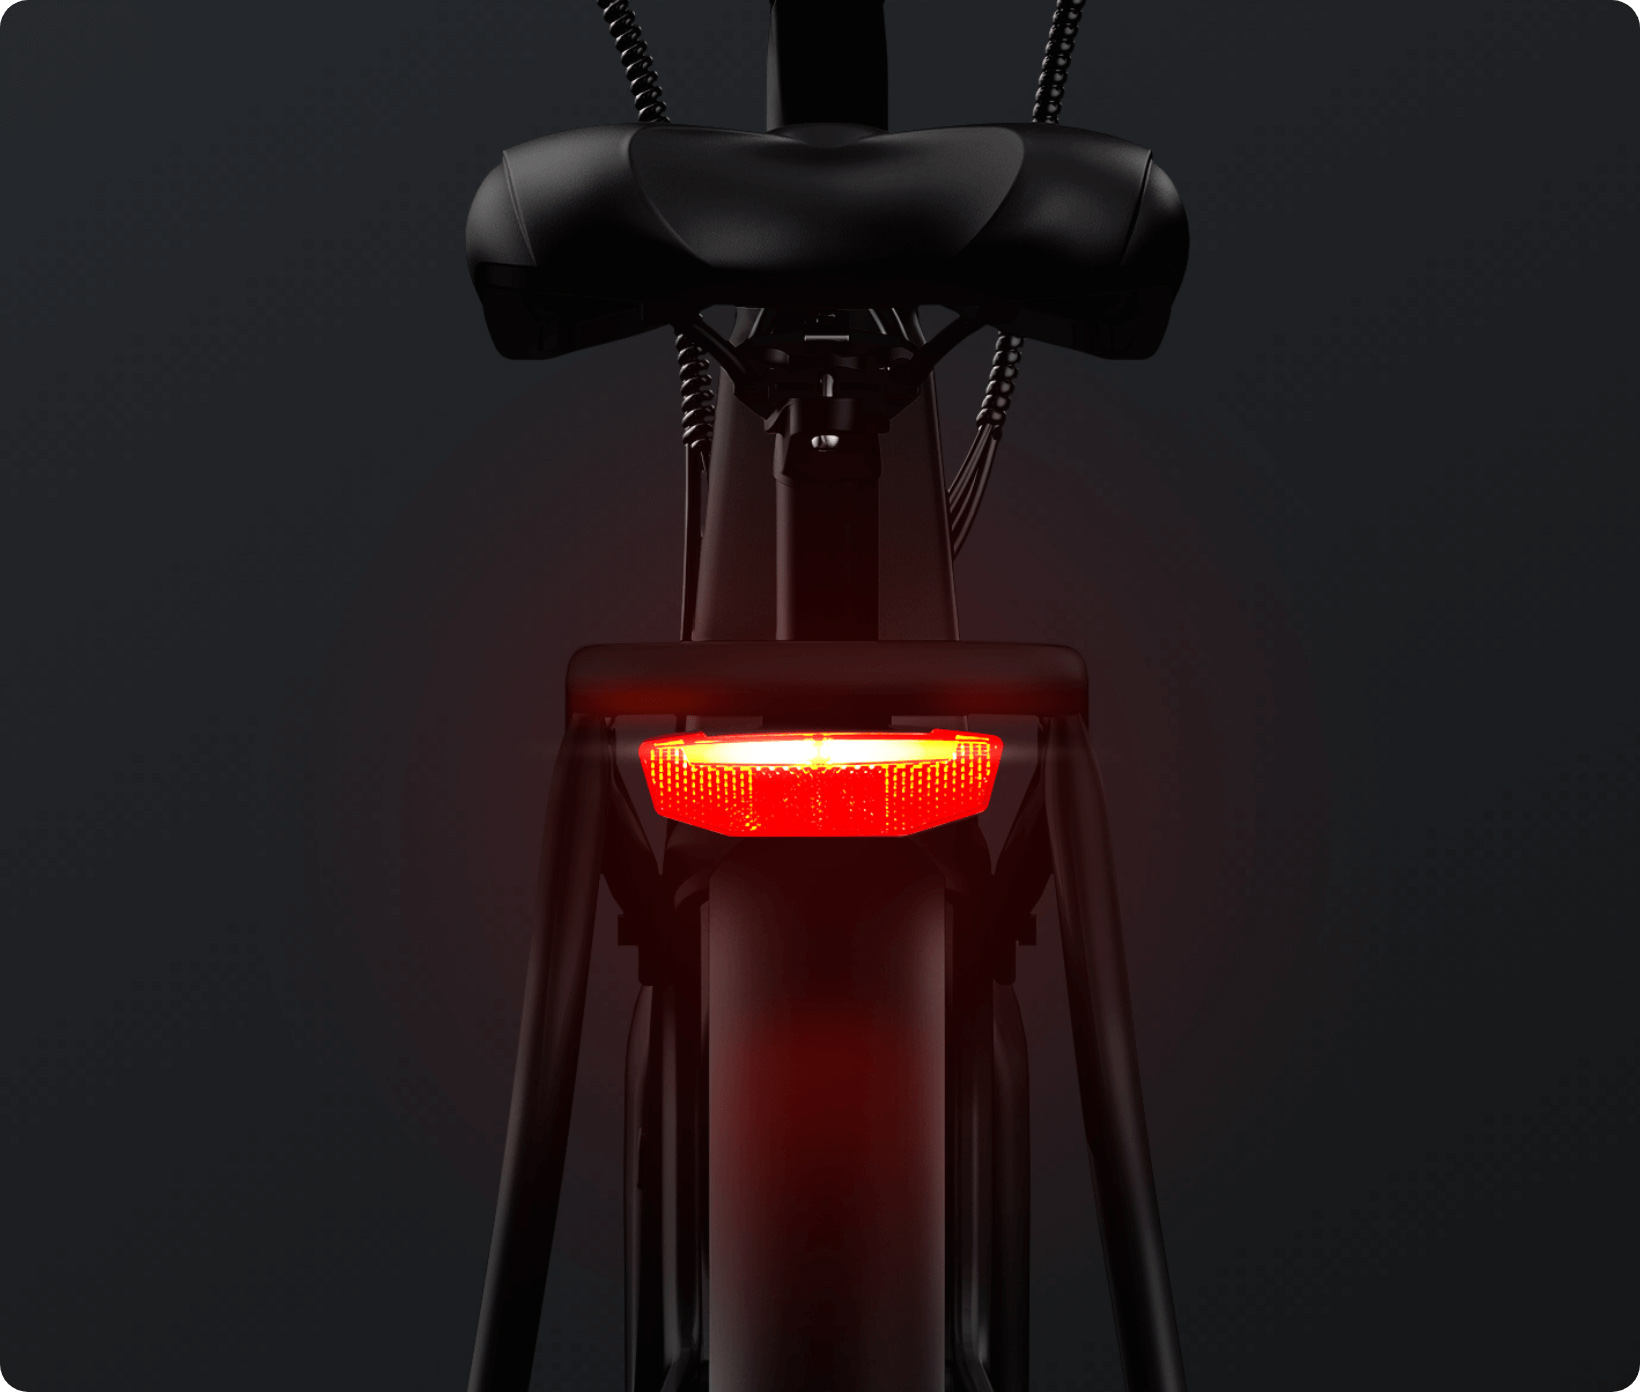 Commuter accessories include an integrated taillight with brake lighting.